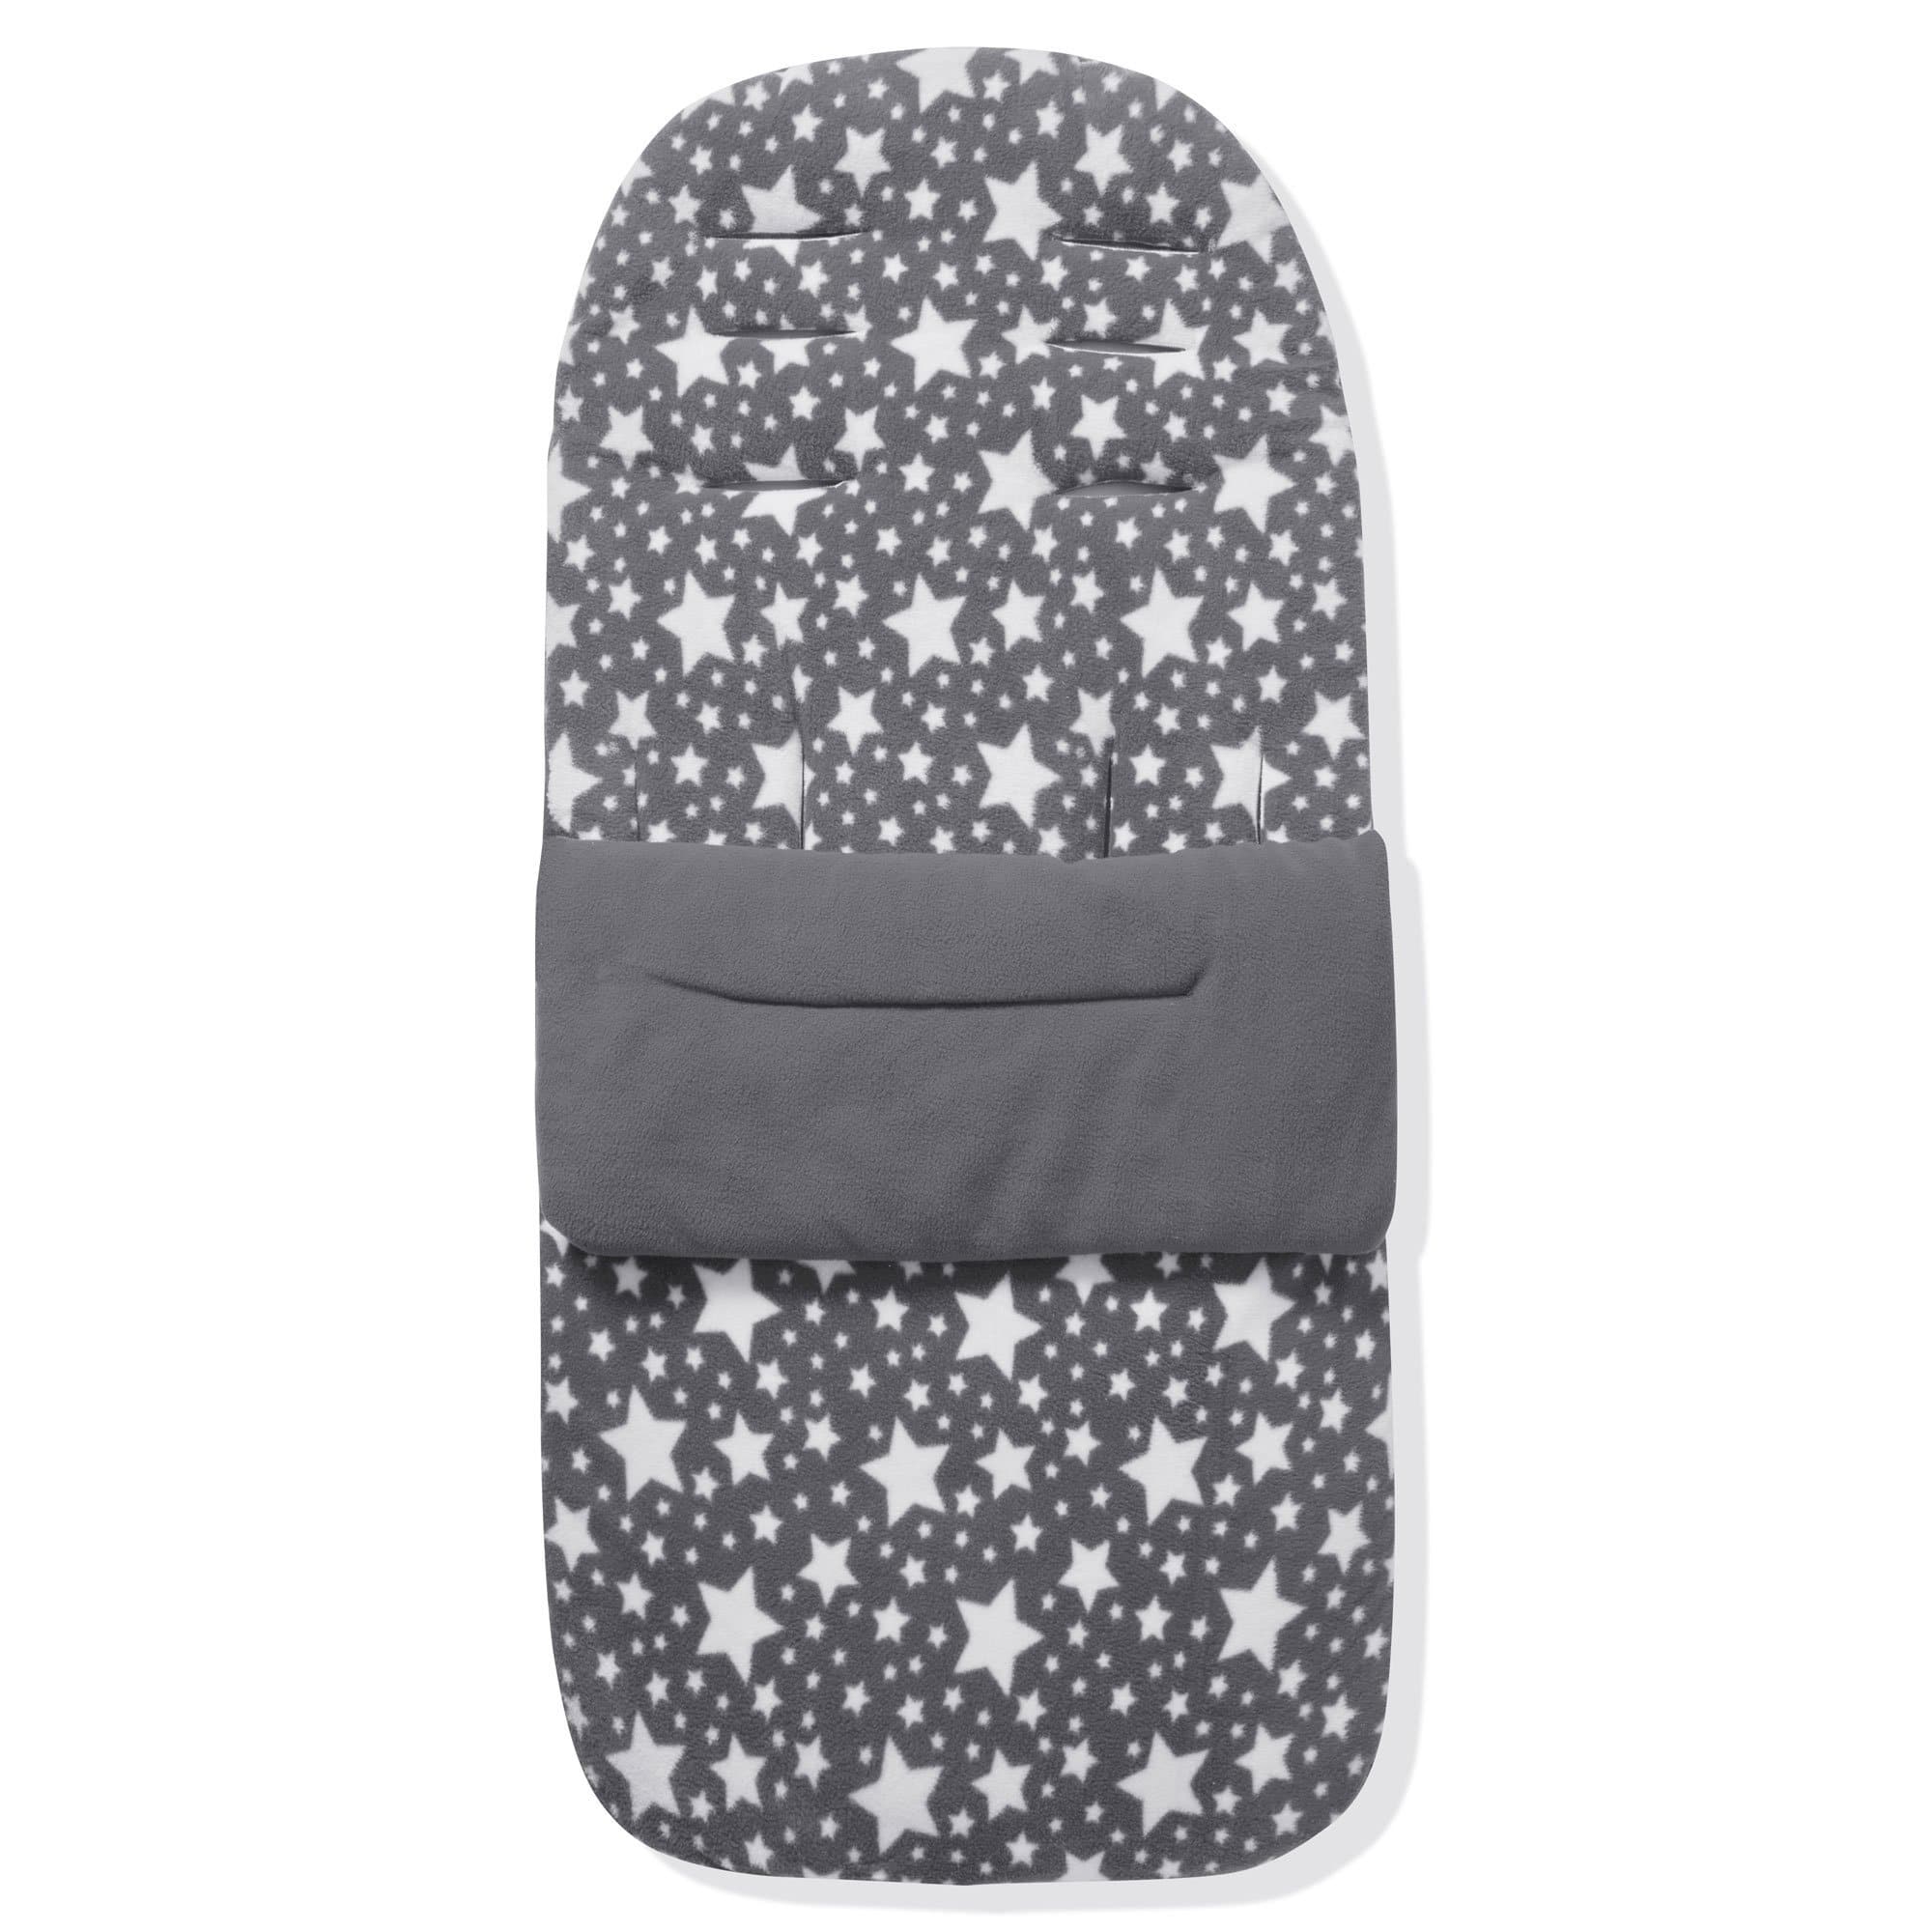 Fleece Footmuff / Cosy Toes Compatible with Bebe 9 - Grey Star / Fits All Models | For Your Little One